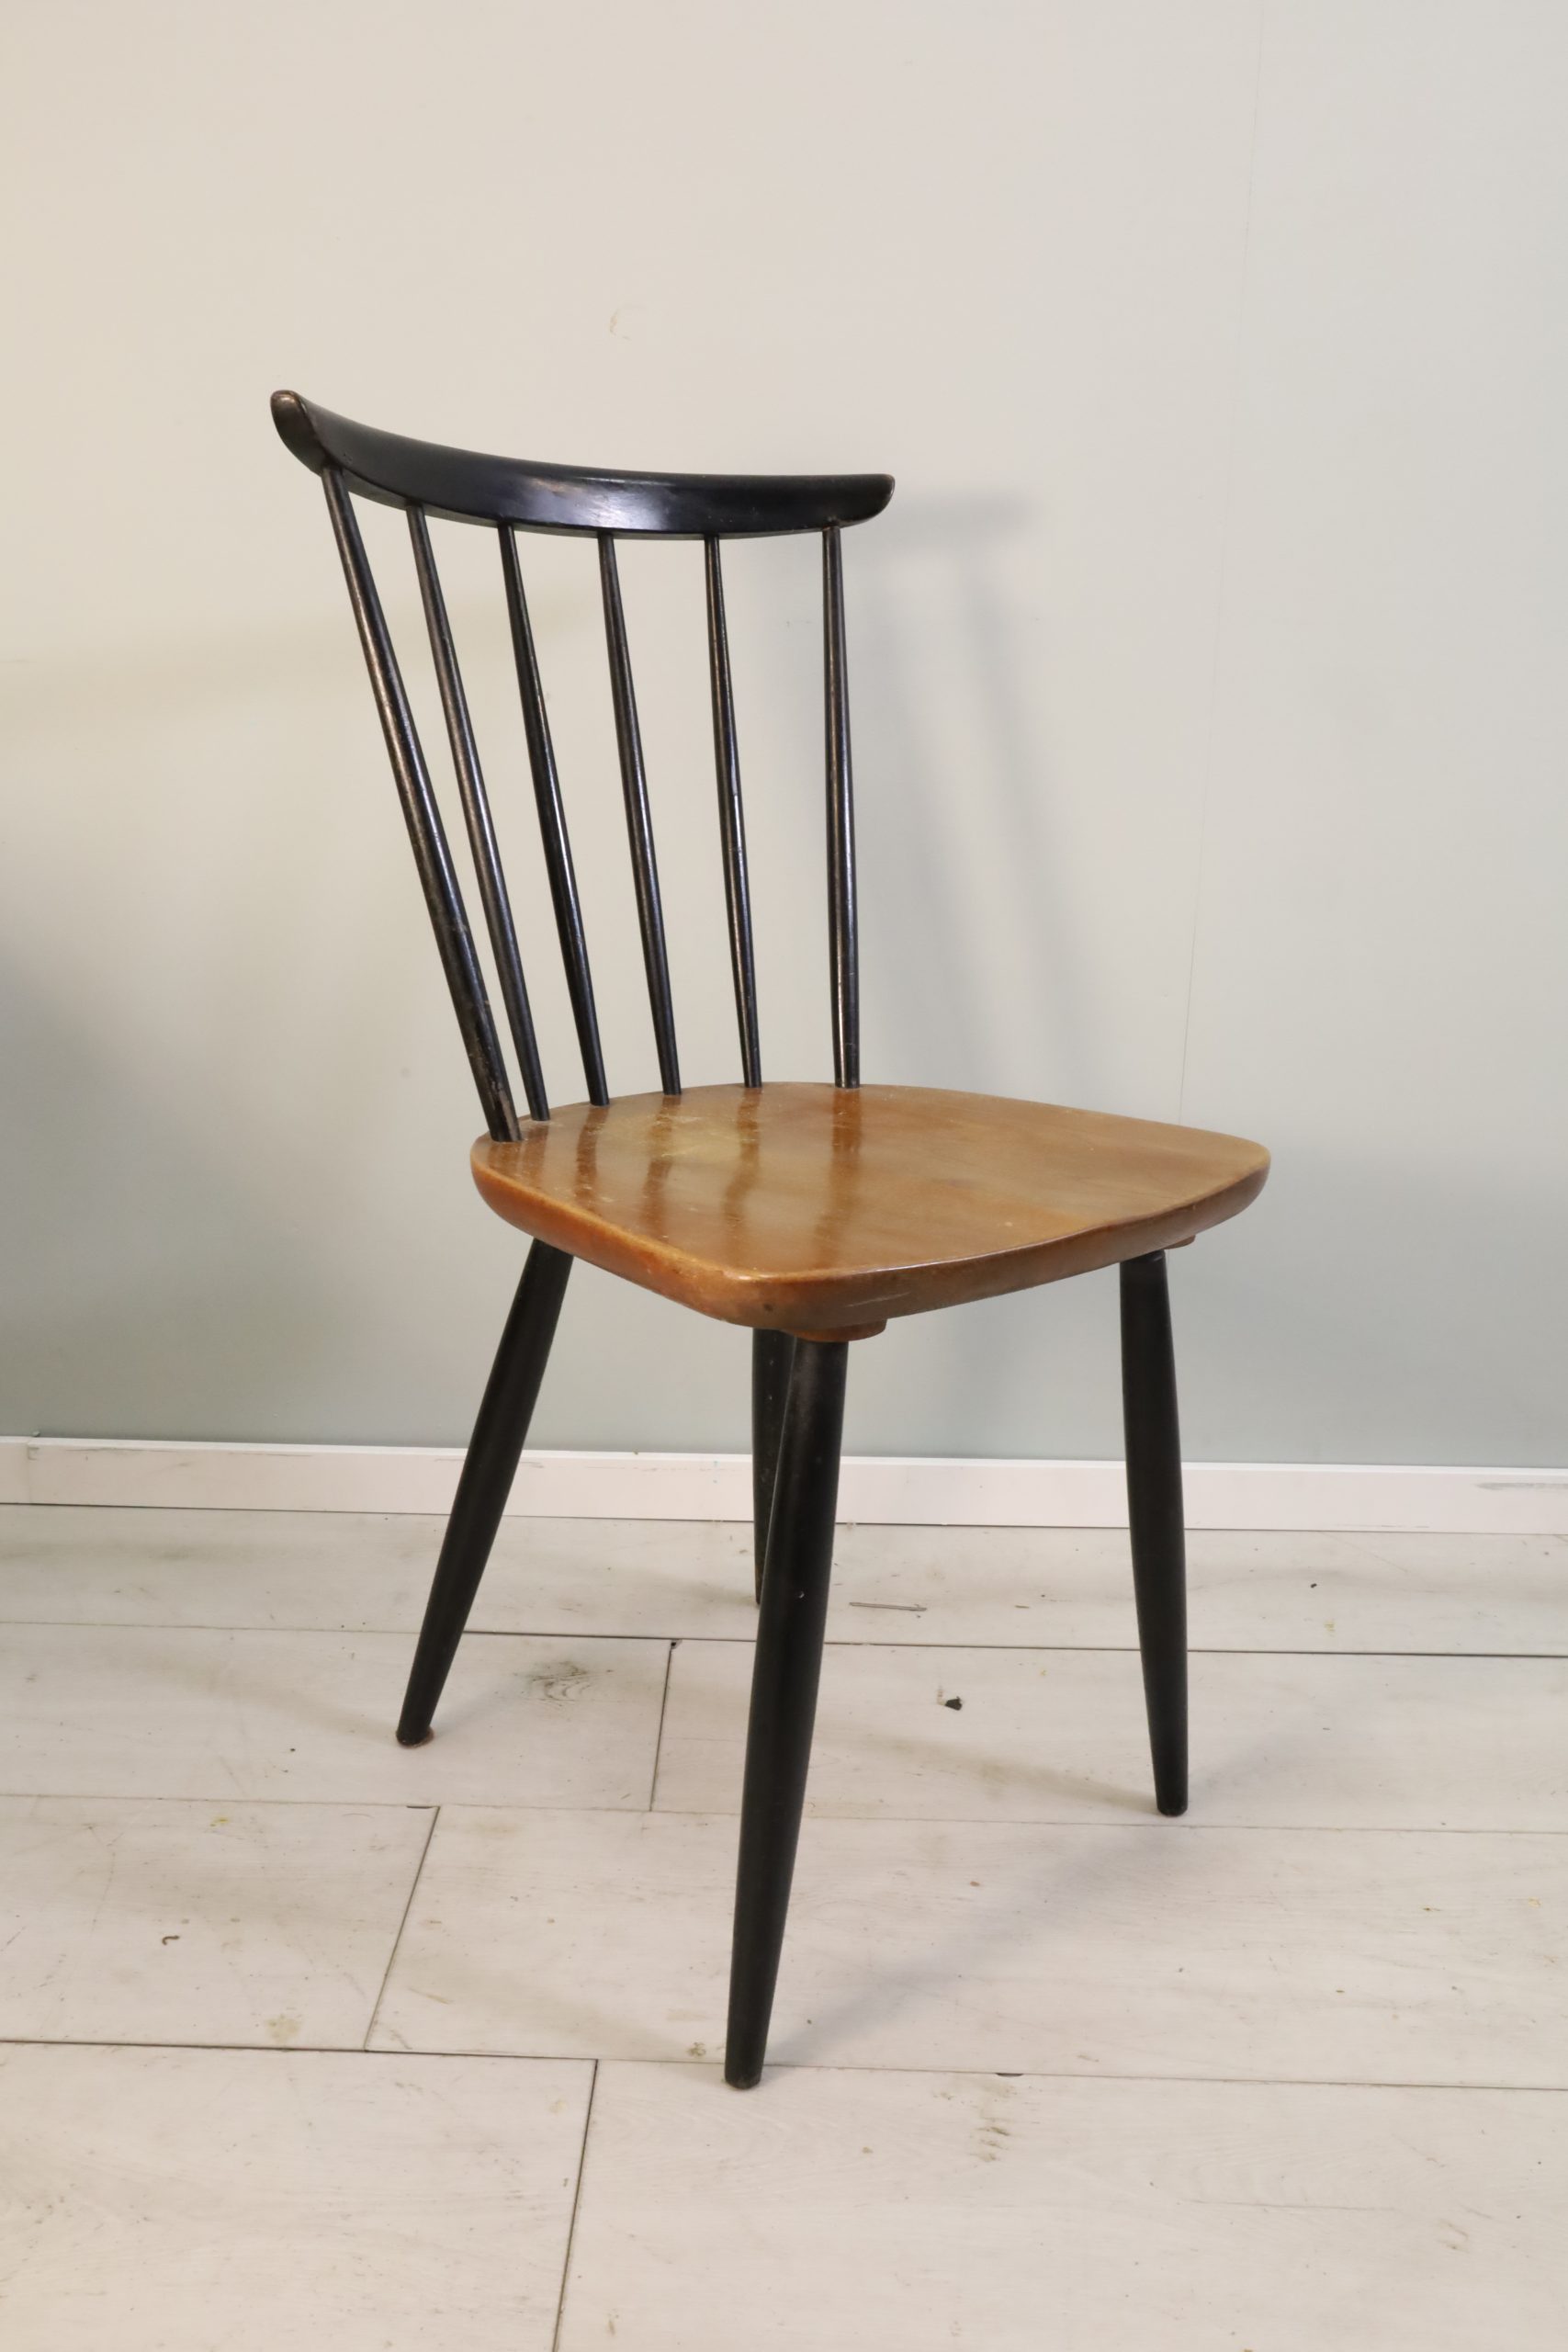 English dining room chairs - 50s Mid Century - 2 pcs